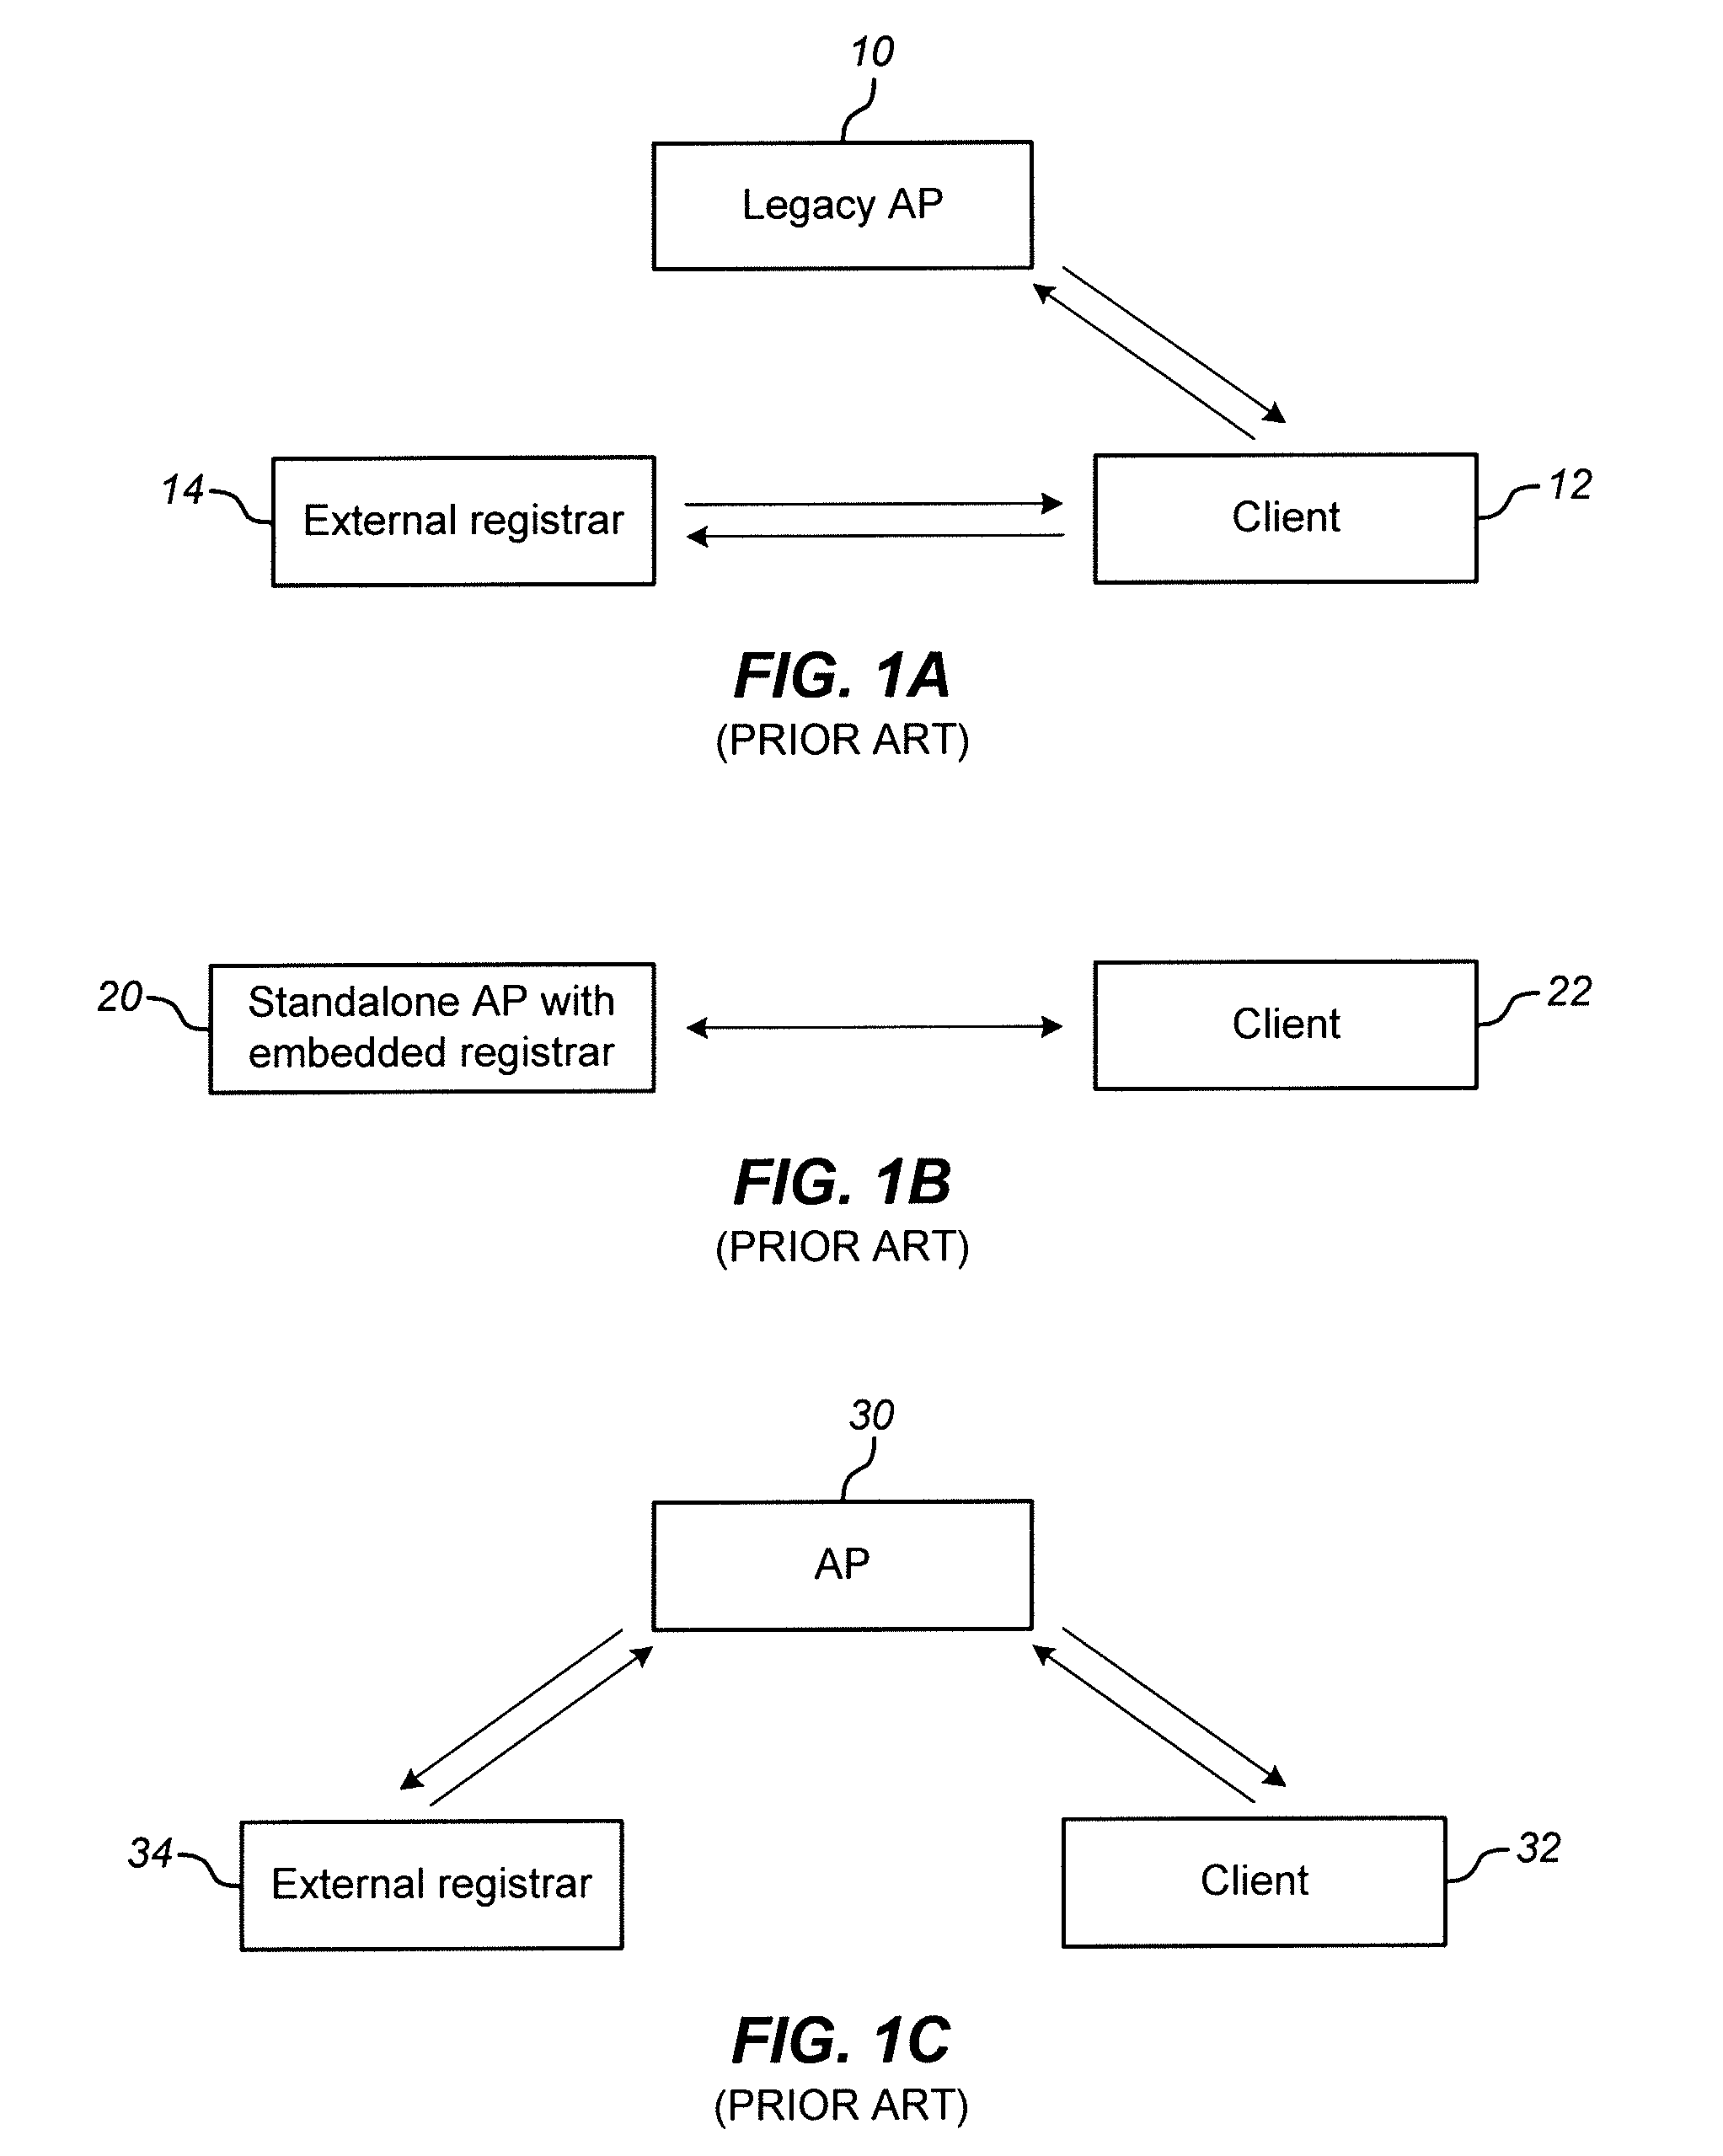 Establishment of ad-hoc networks between multiple devices